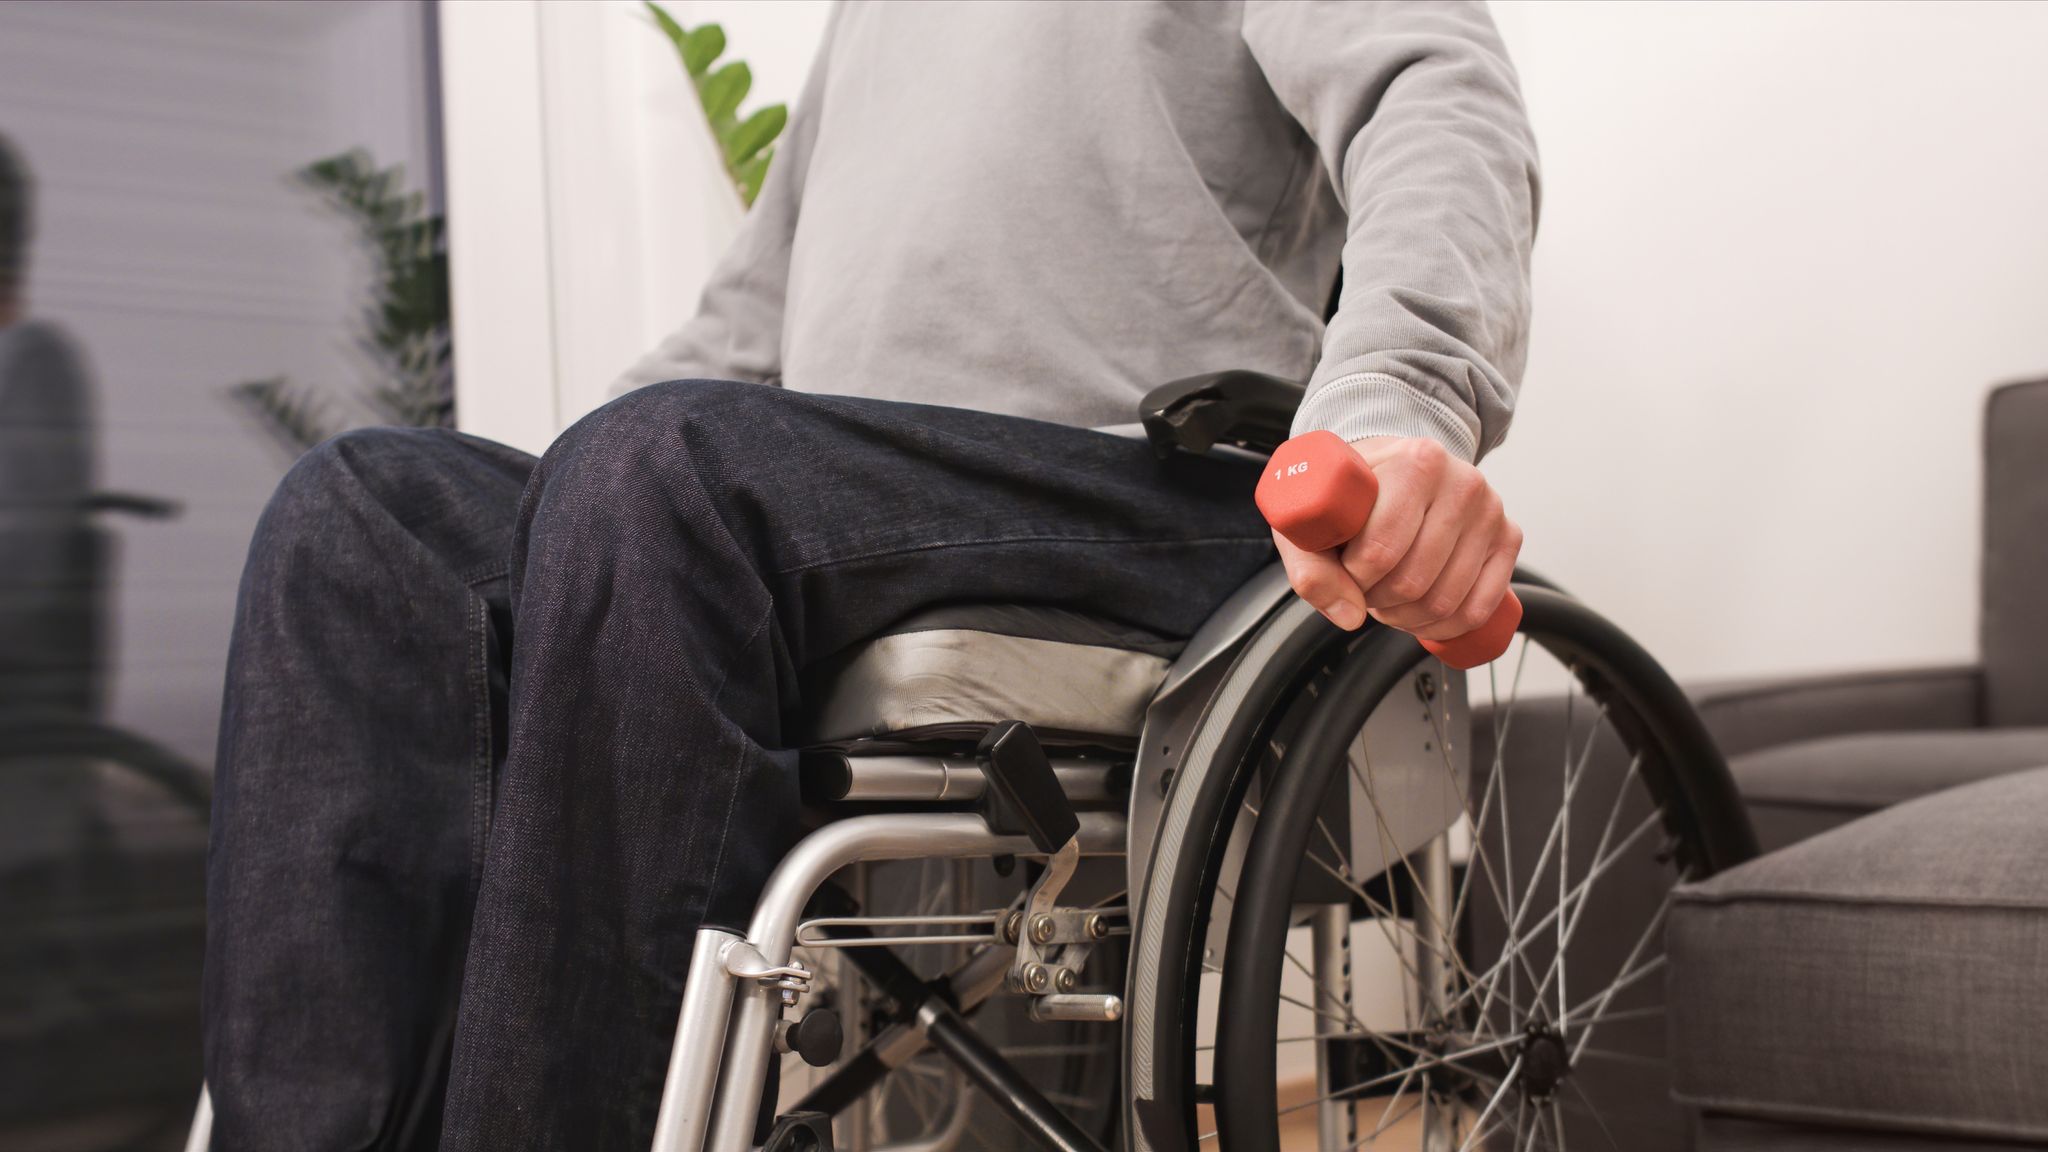 Muscular dystrophy affects 40,000 more people in UK than previously ...